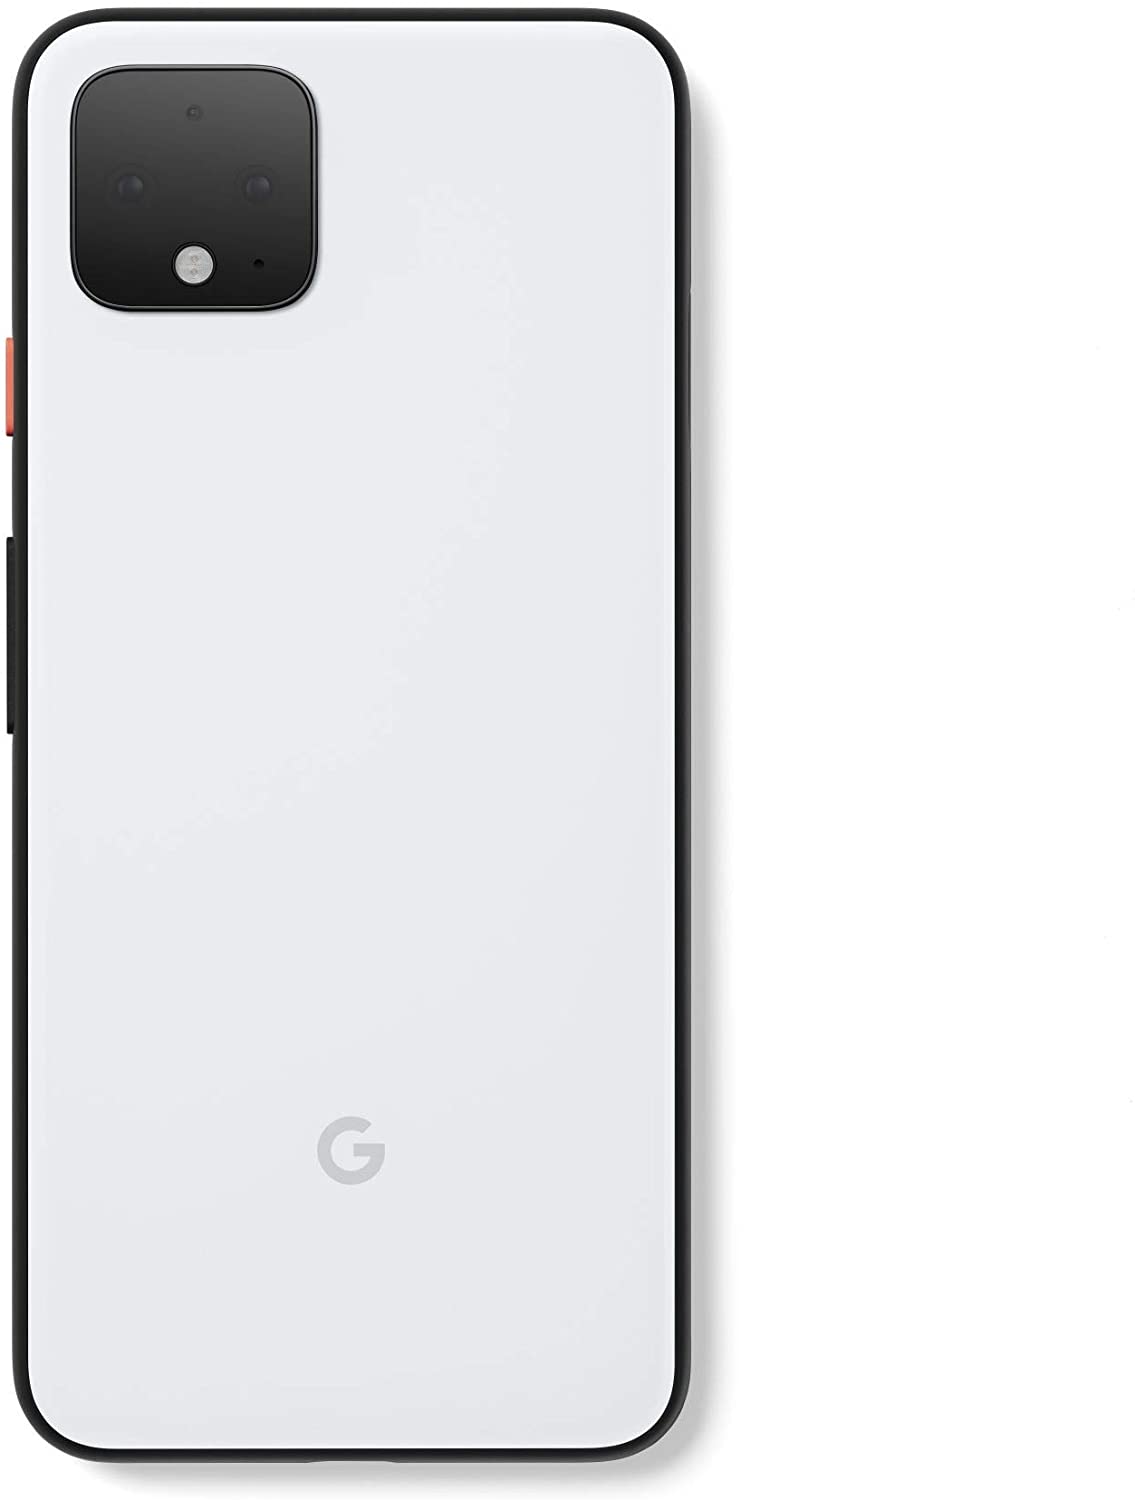 Google Pixel4 XL 64GB Clearly White